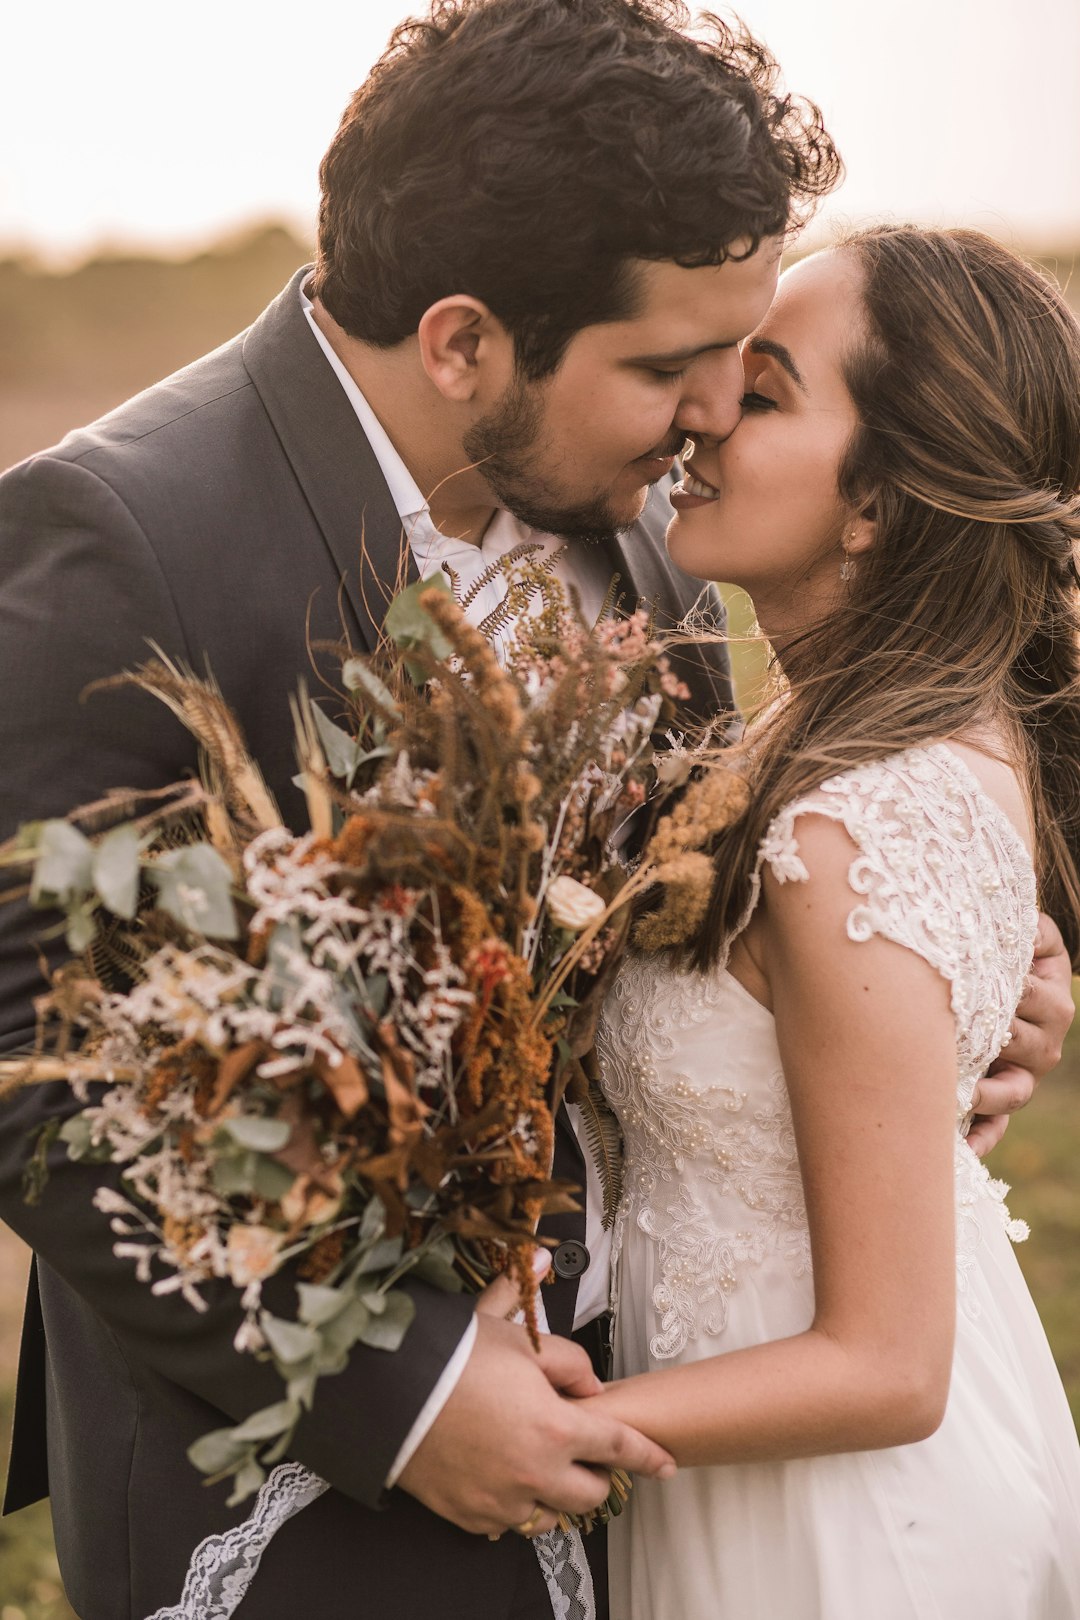 man in black suit jacket kissing woman in white floral wedding dress